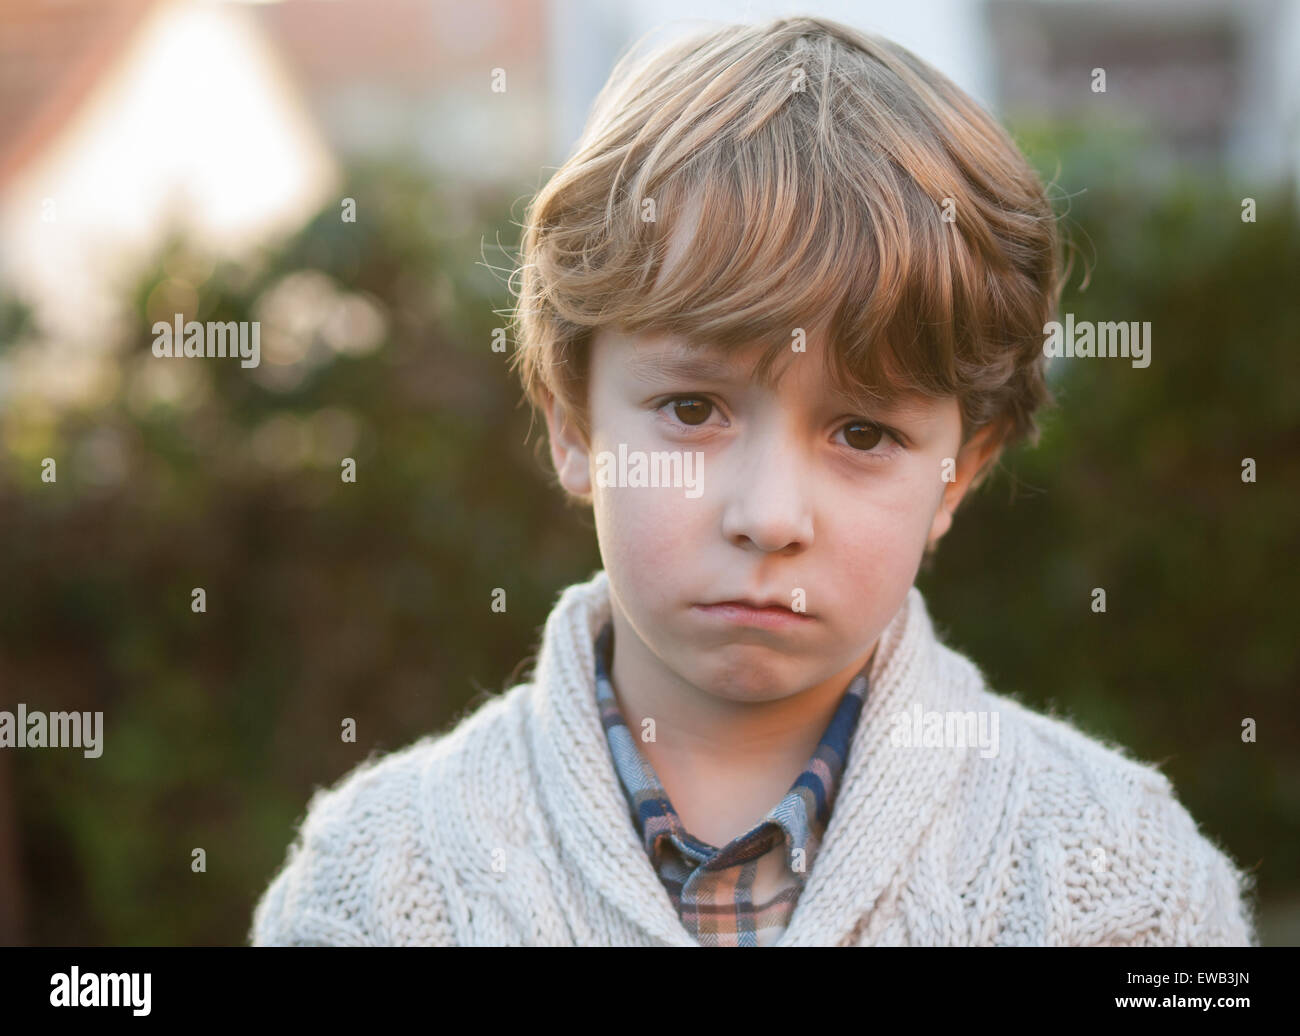 Sad little boy looking at camera outdoors Stock Photo